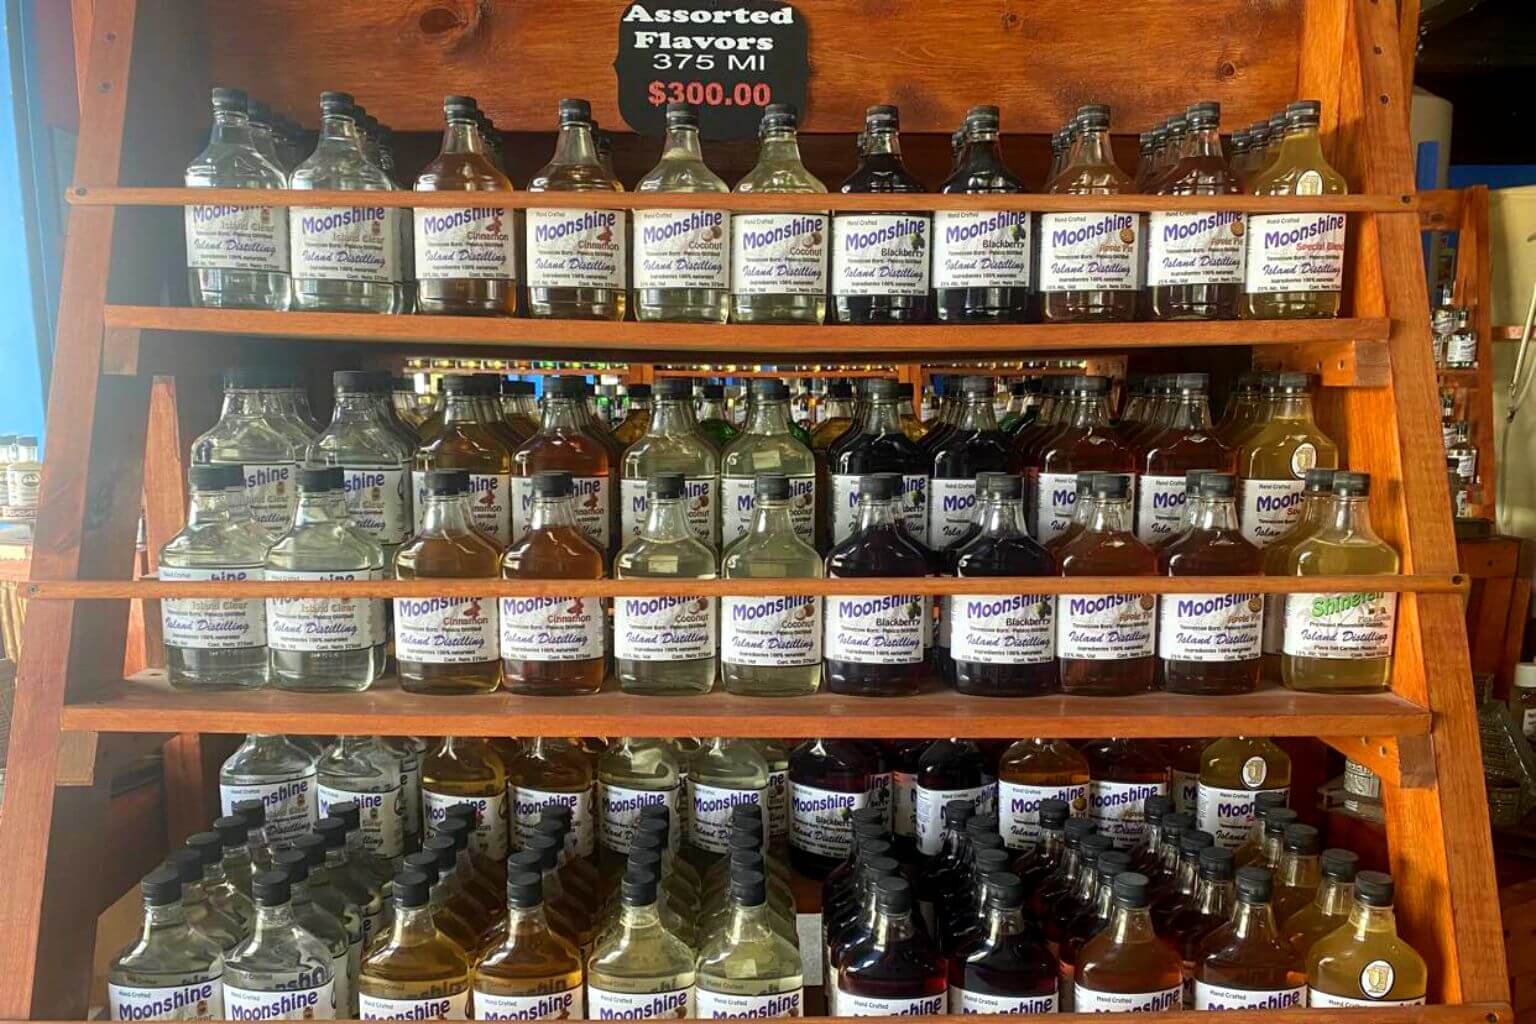 There's plenty of Mexican Moonshine available in a range of 15 flavors at Island Distilling.